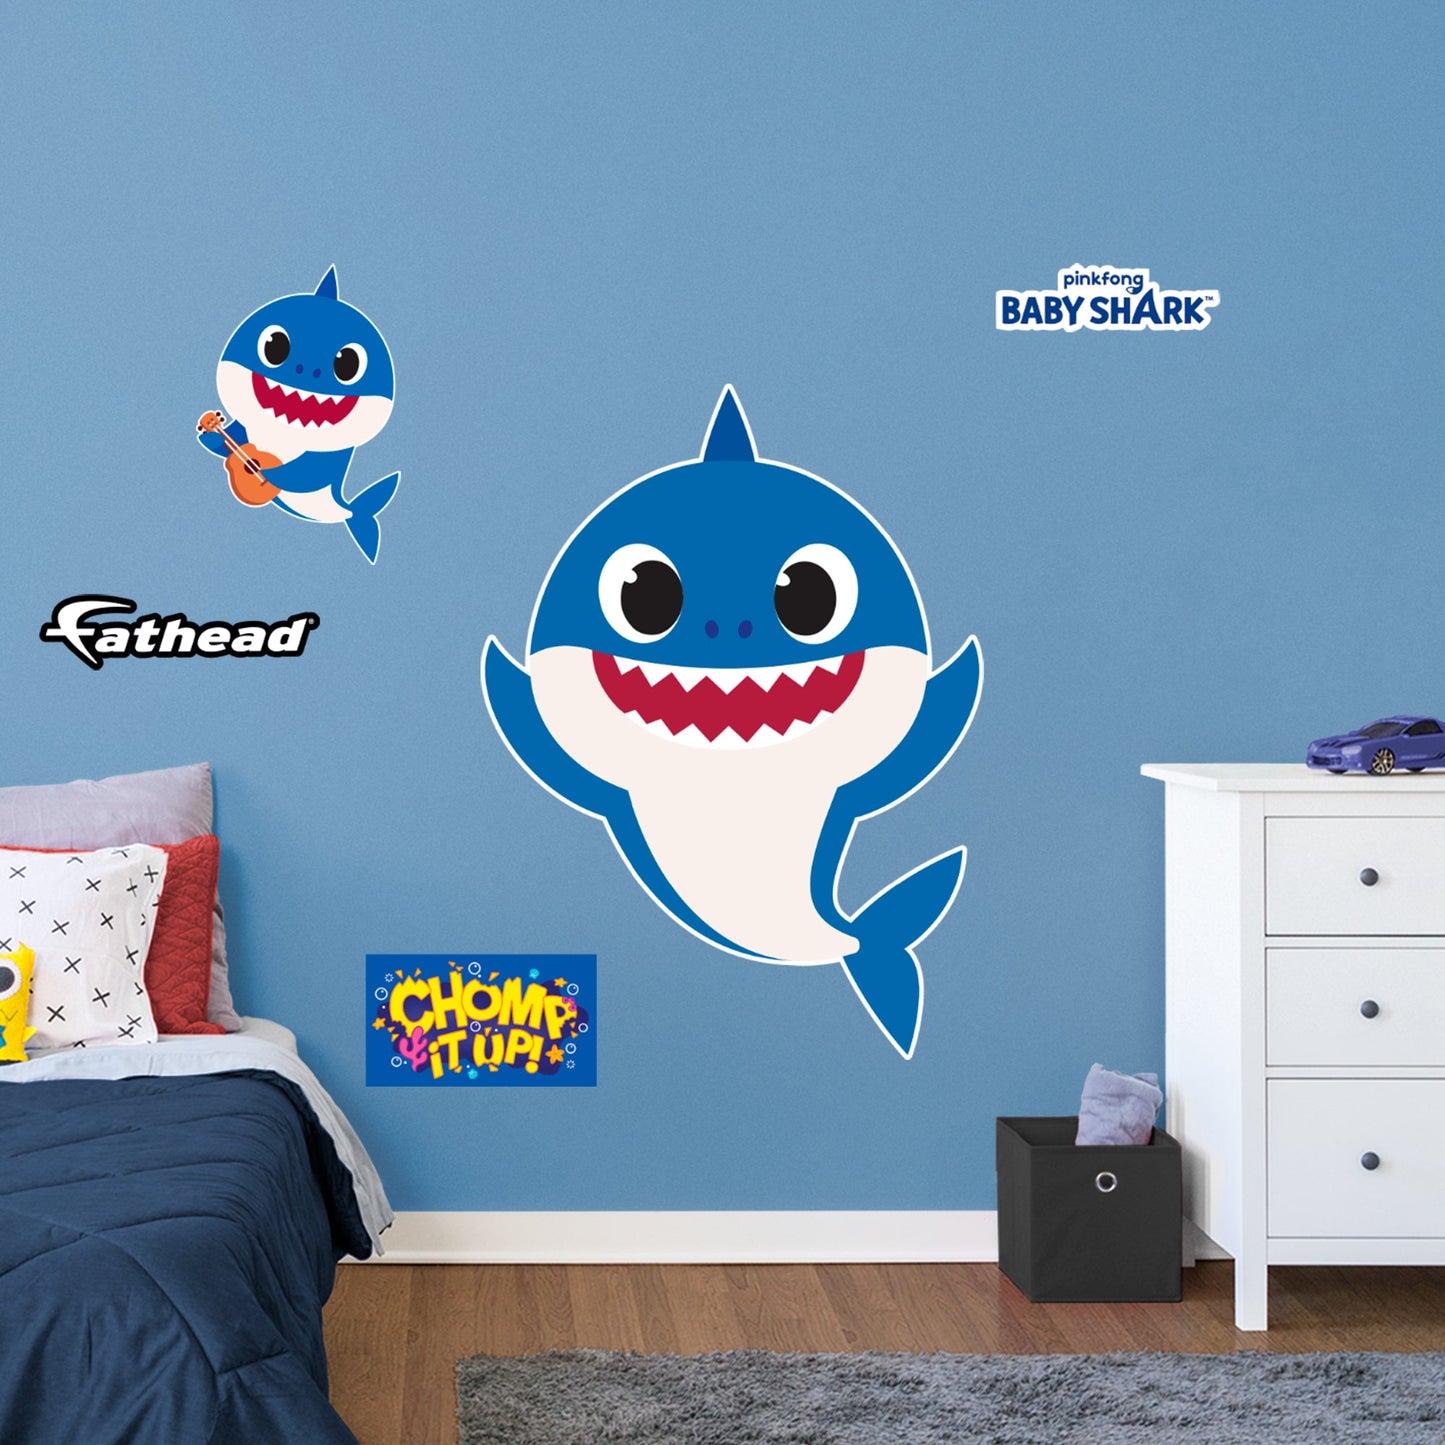 Baby Shark: Daddy Shark RealBig - Officially Licensed Nickelodeon Removable Adhesive Decal